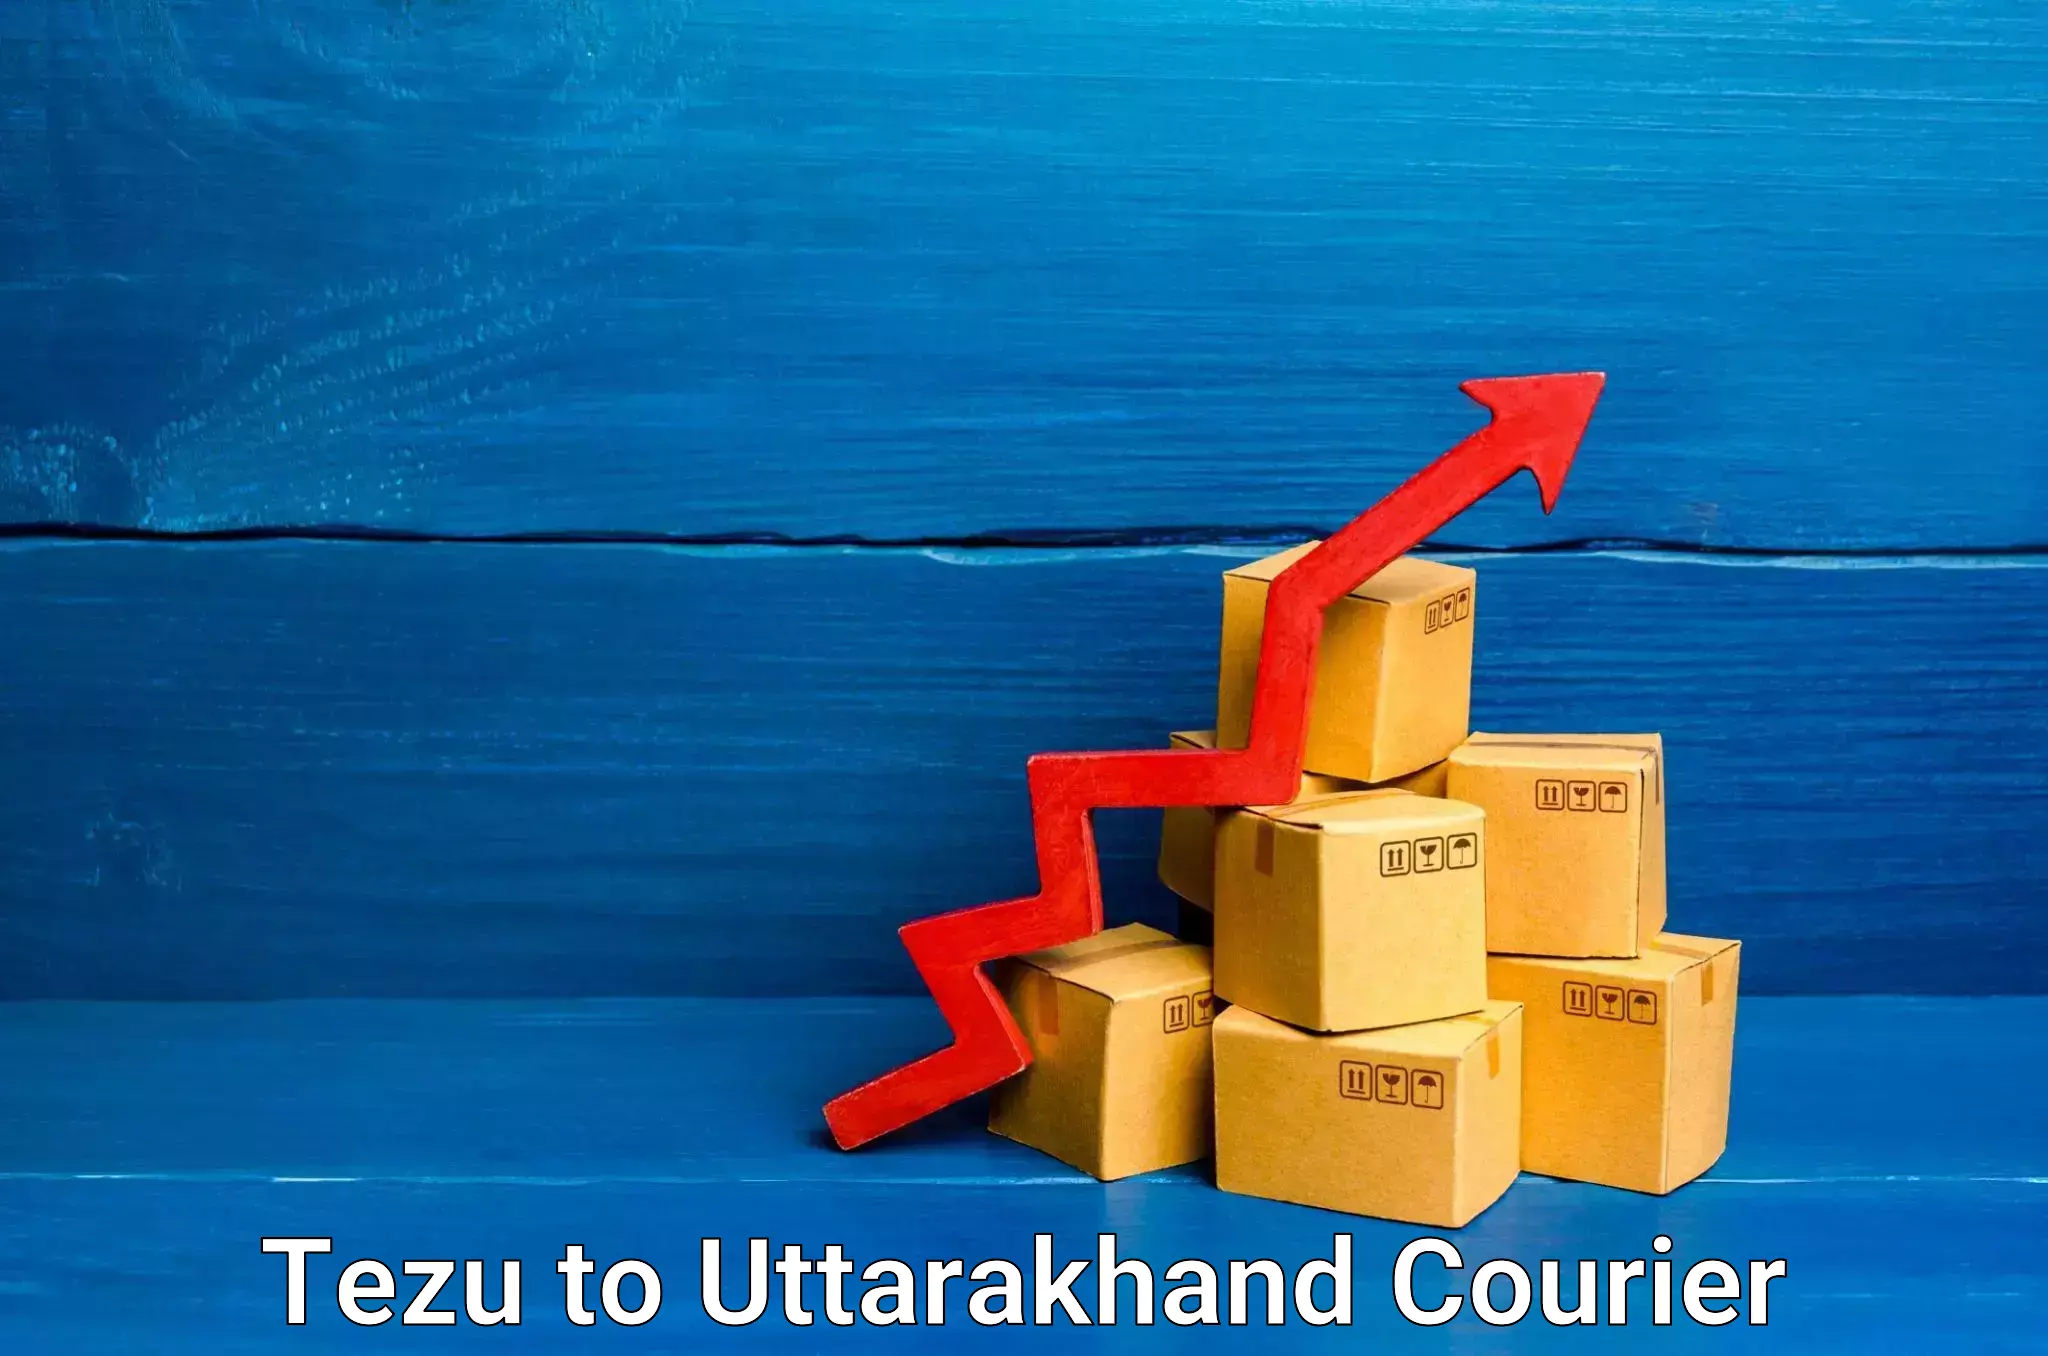 Reliable parcel services Tezu to Rishikesh